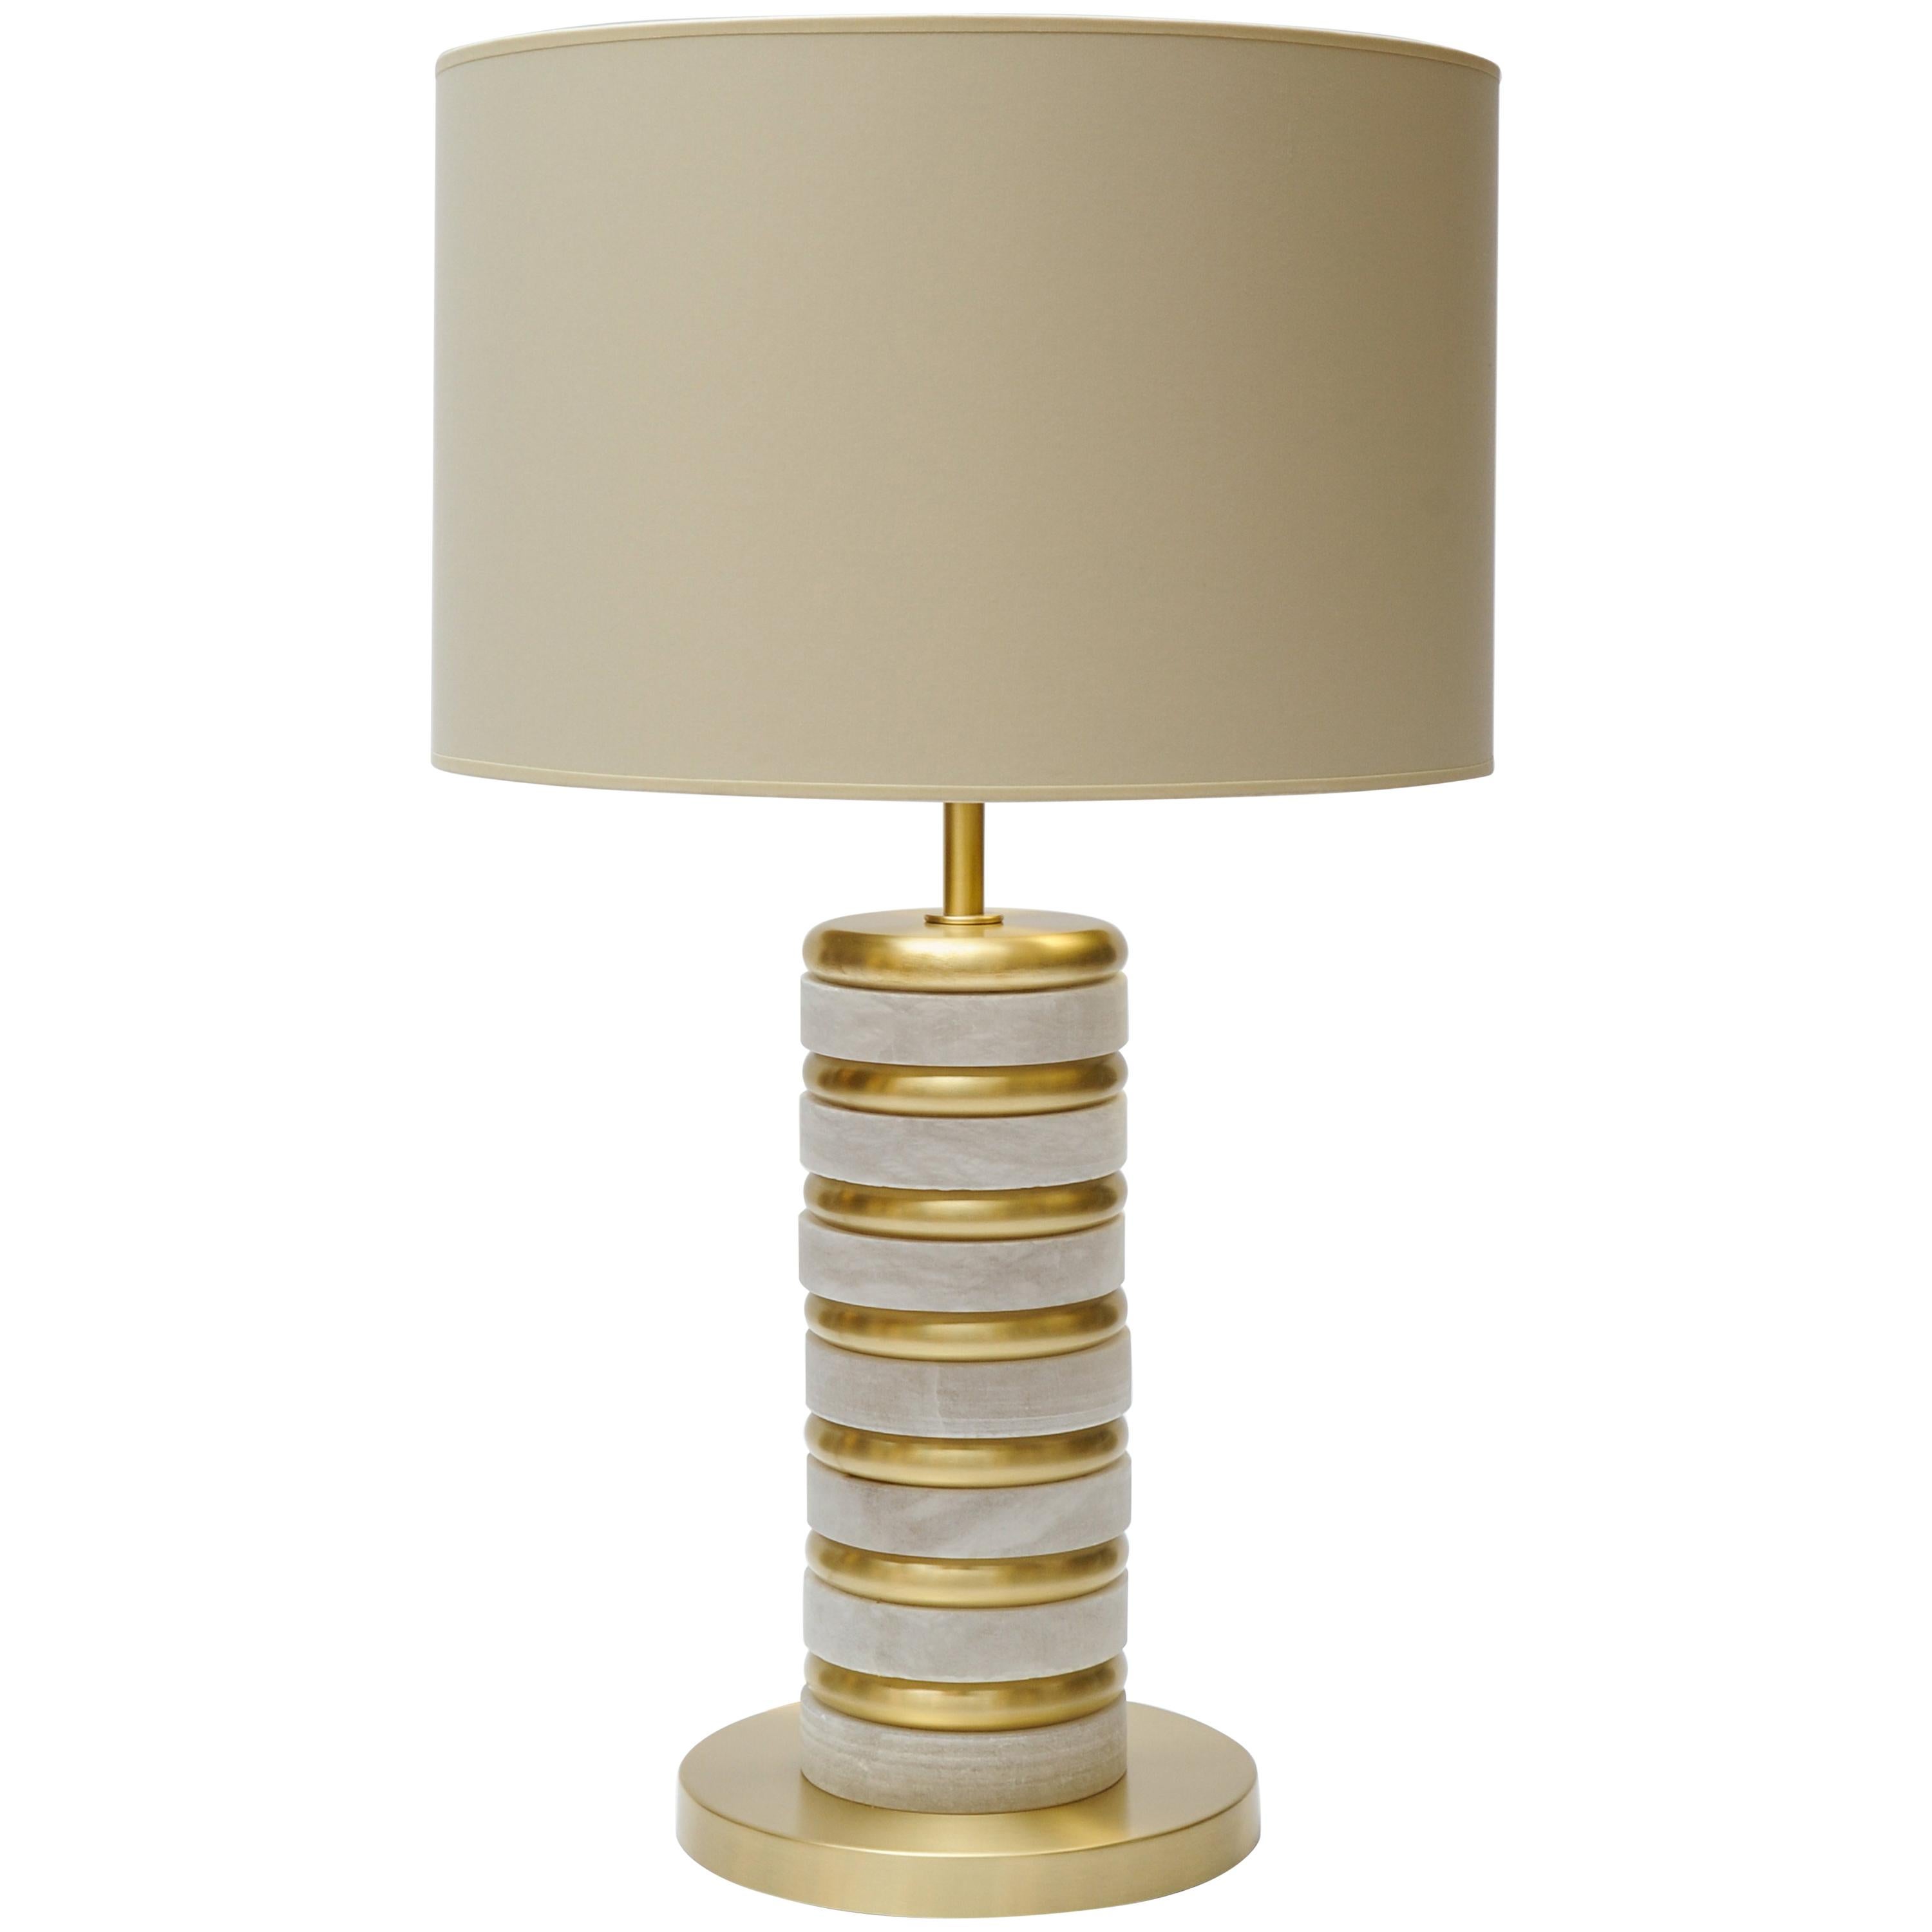 Glustin Luminaires Creation Pair of Alabaster and Brass Rings Table Lamps